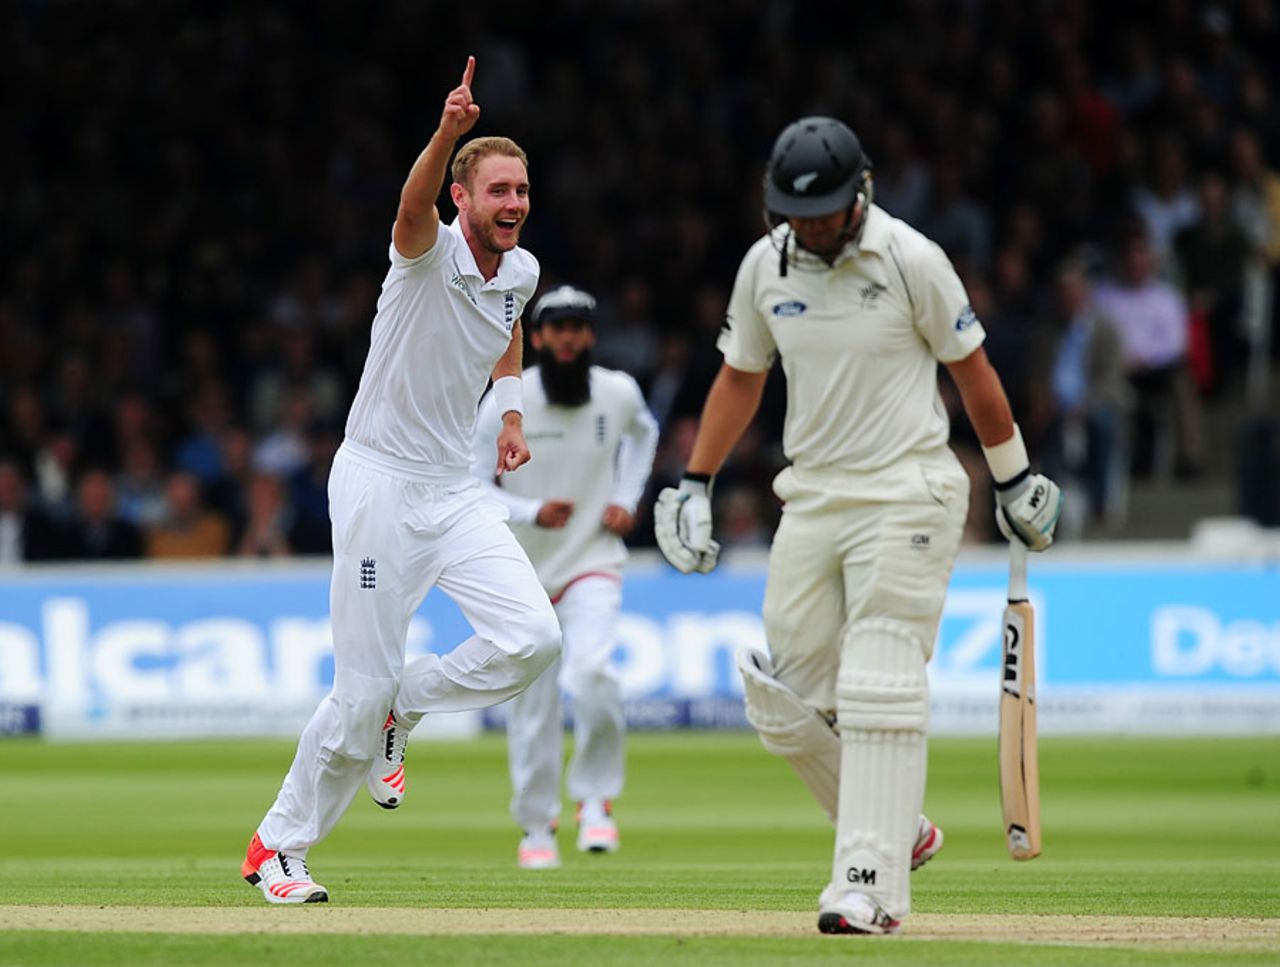 Stuart Broad had Ross Taylor brilliantly caught down the leg side, England v New Zealand, 1st Investec Test, Lord's, 3rd day, May 23, 2015